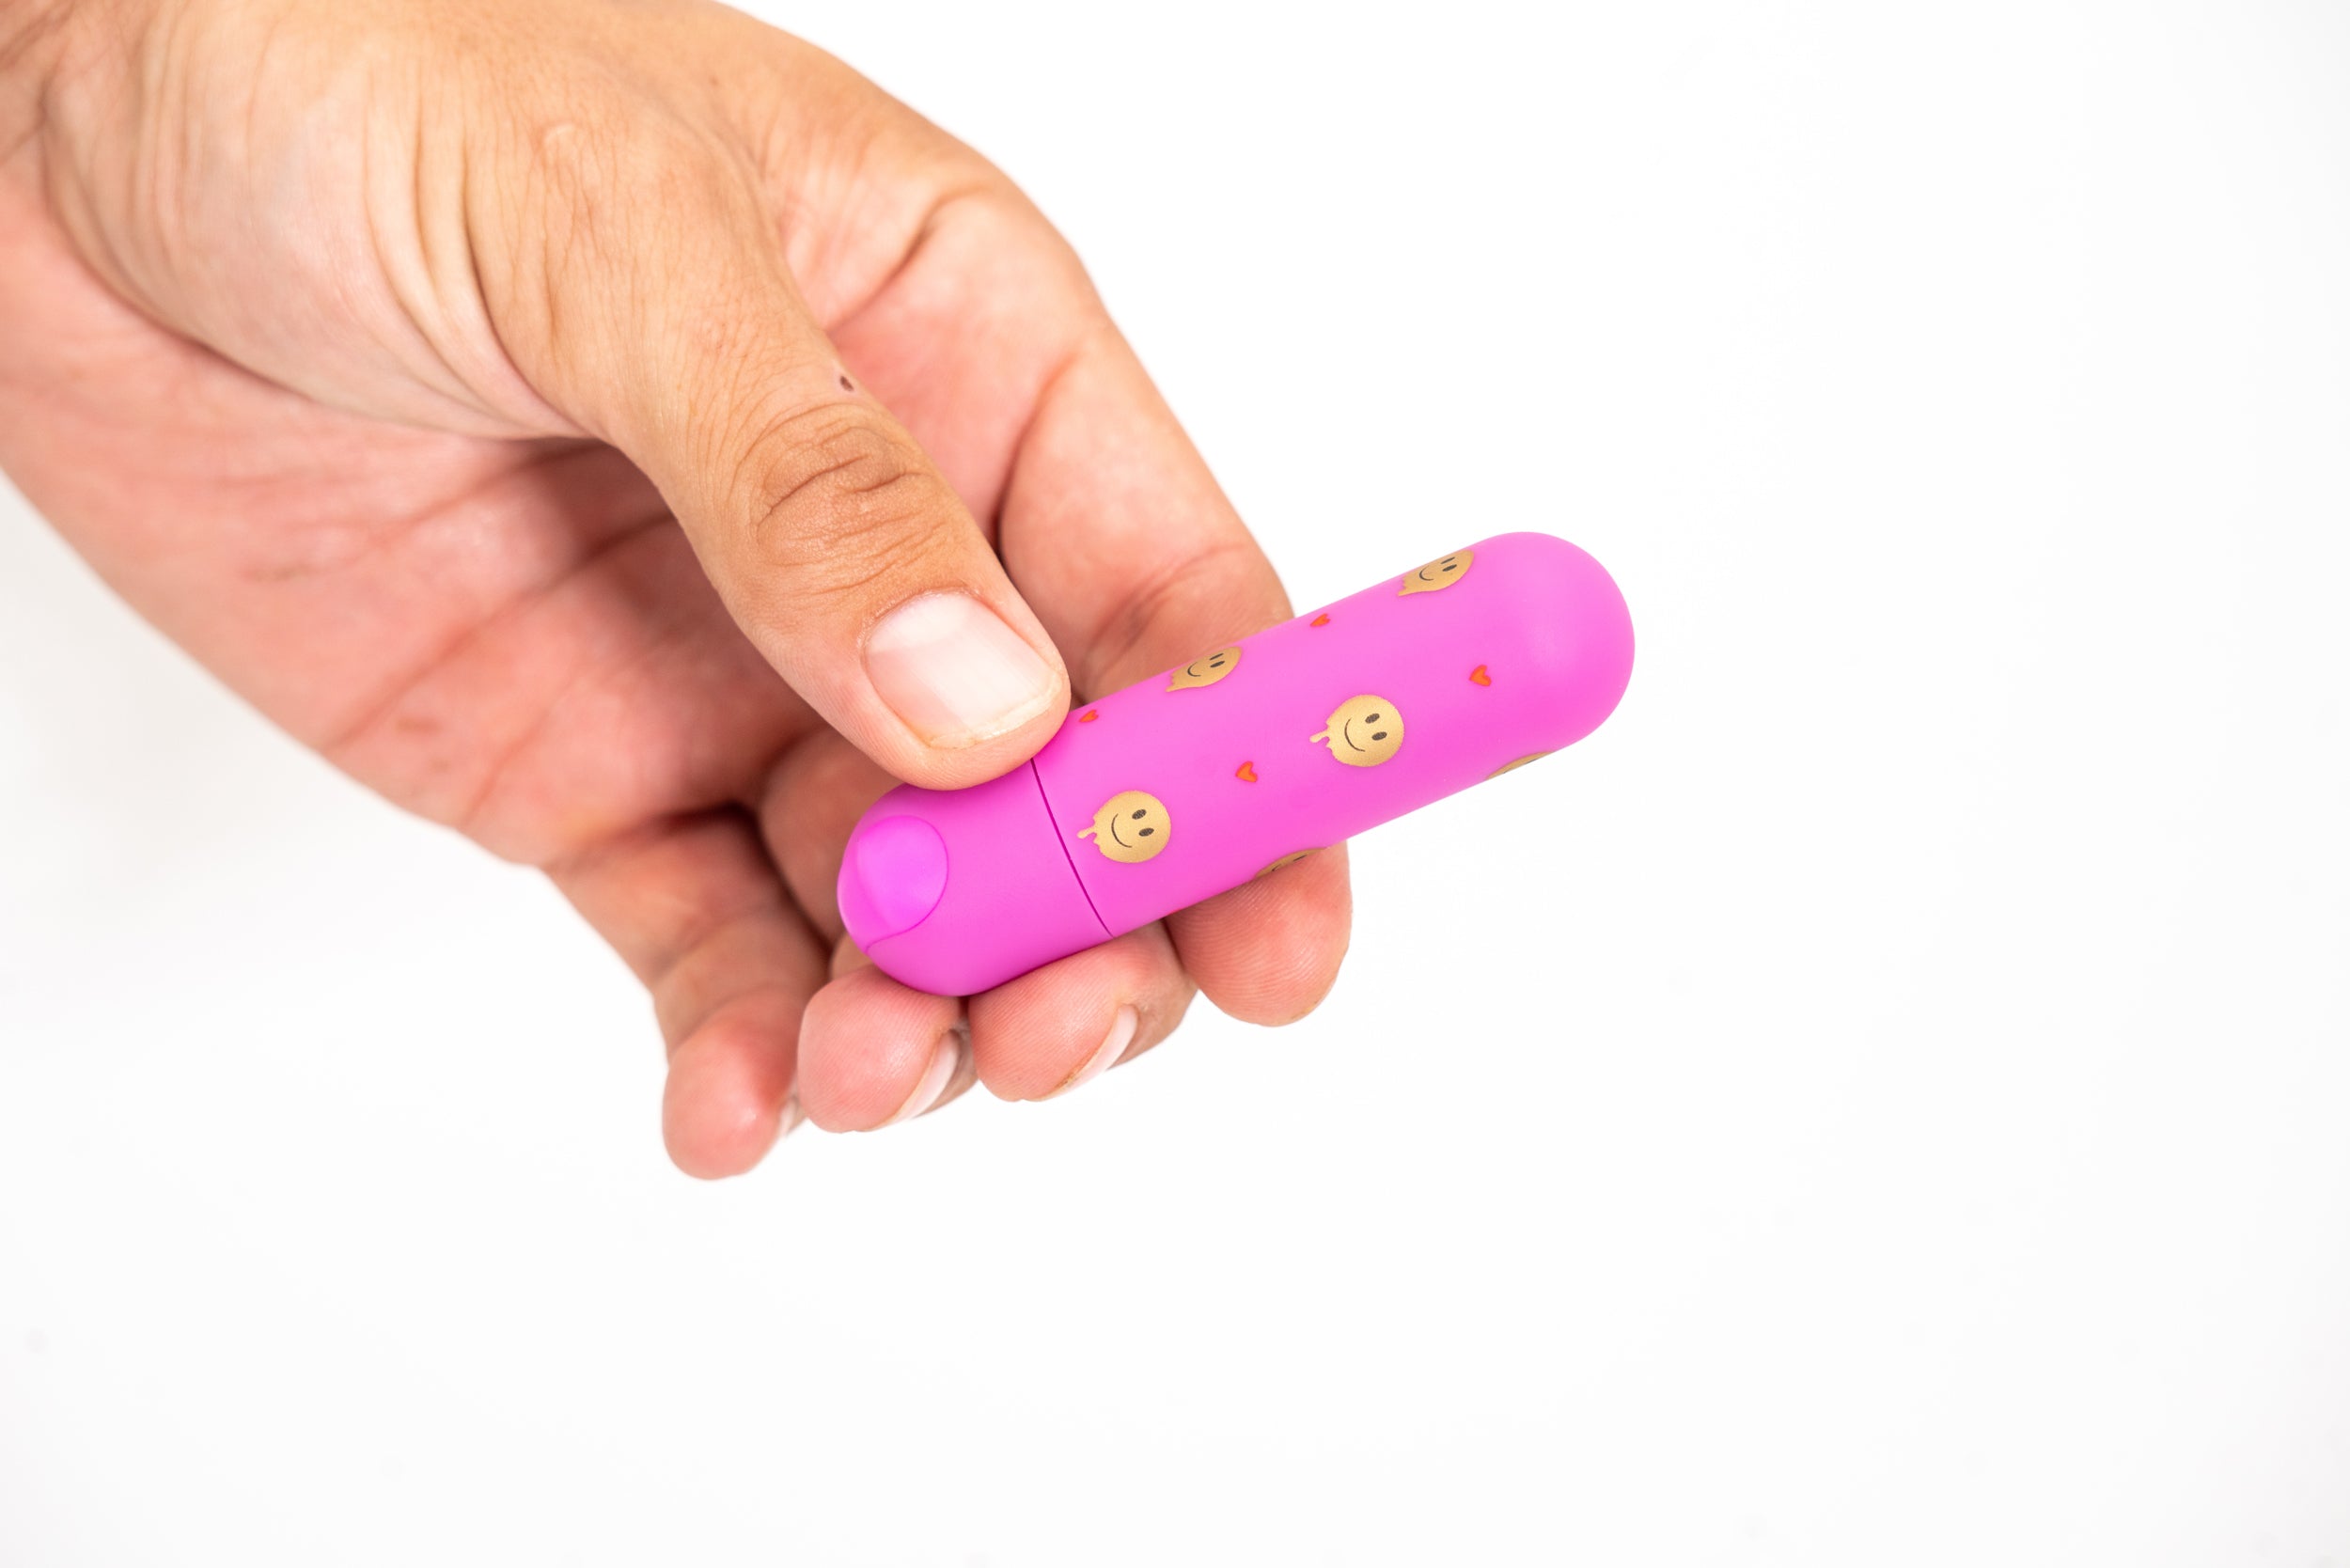 Giggly Super Charged Mini Bullet Vibrator - Pink